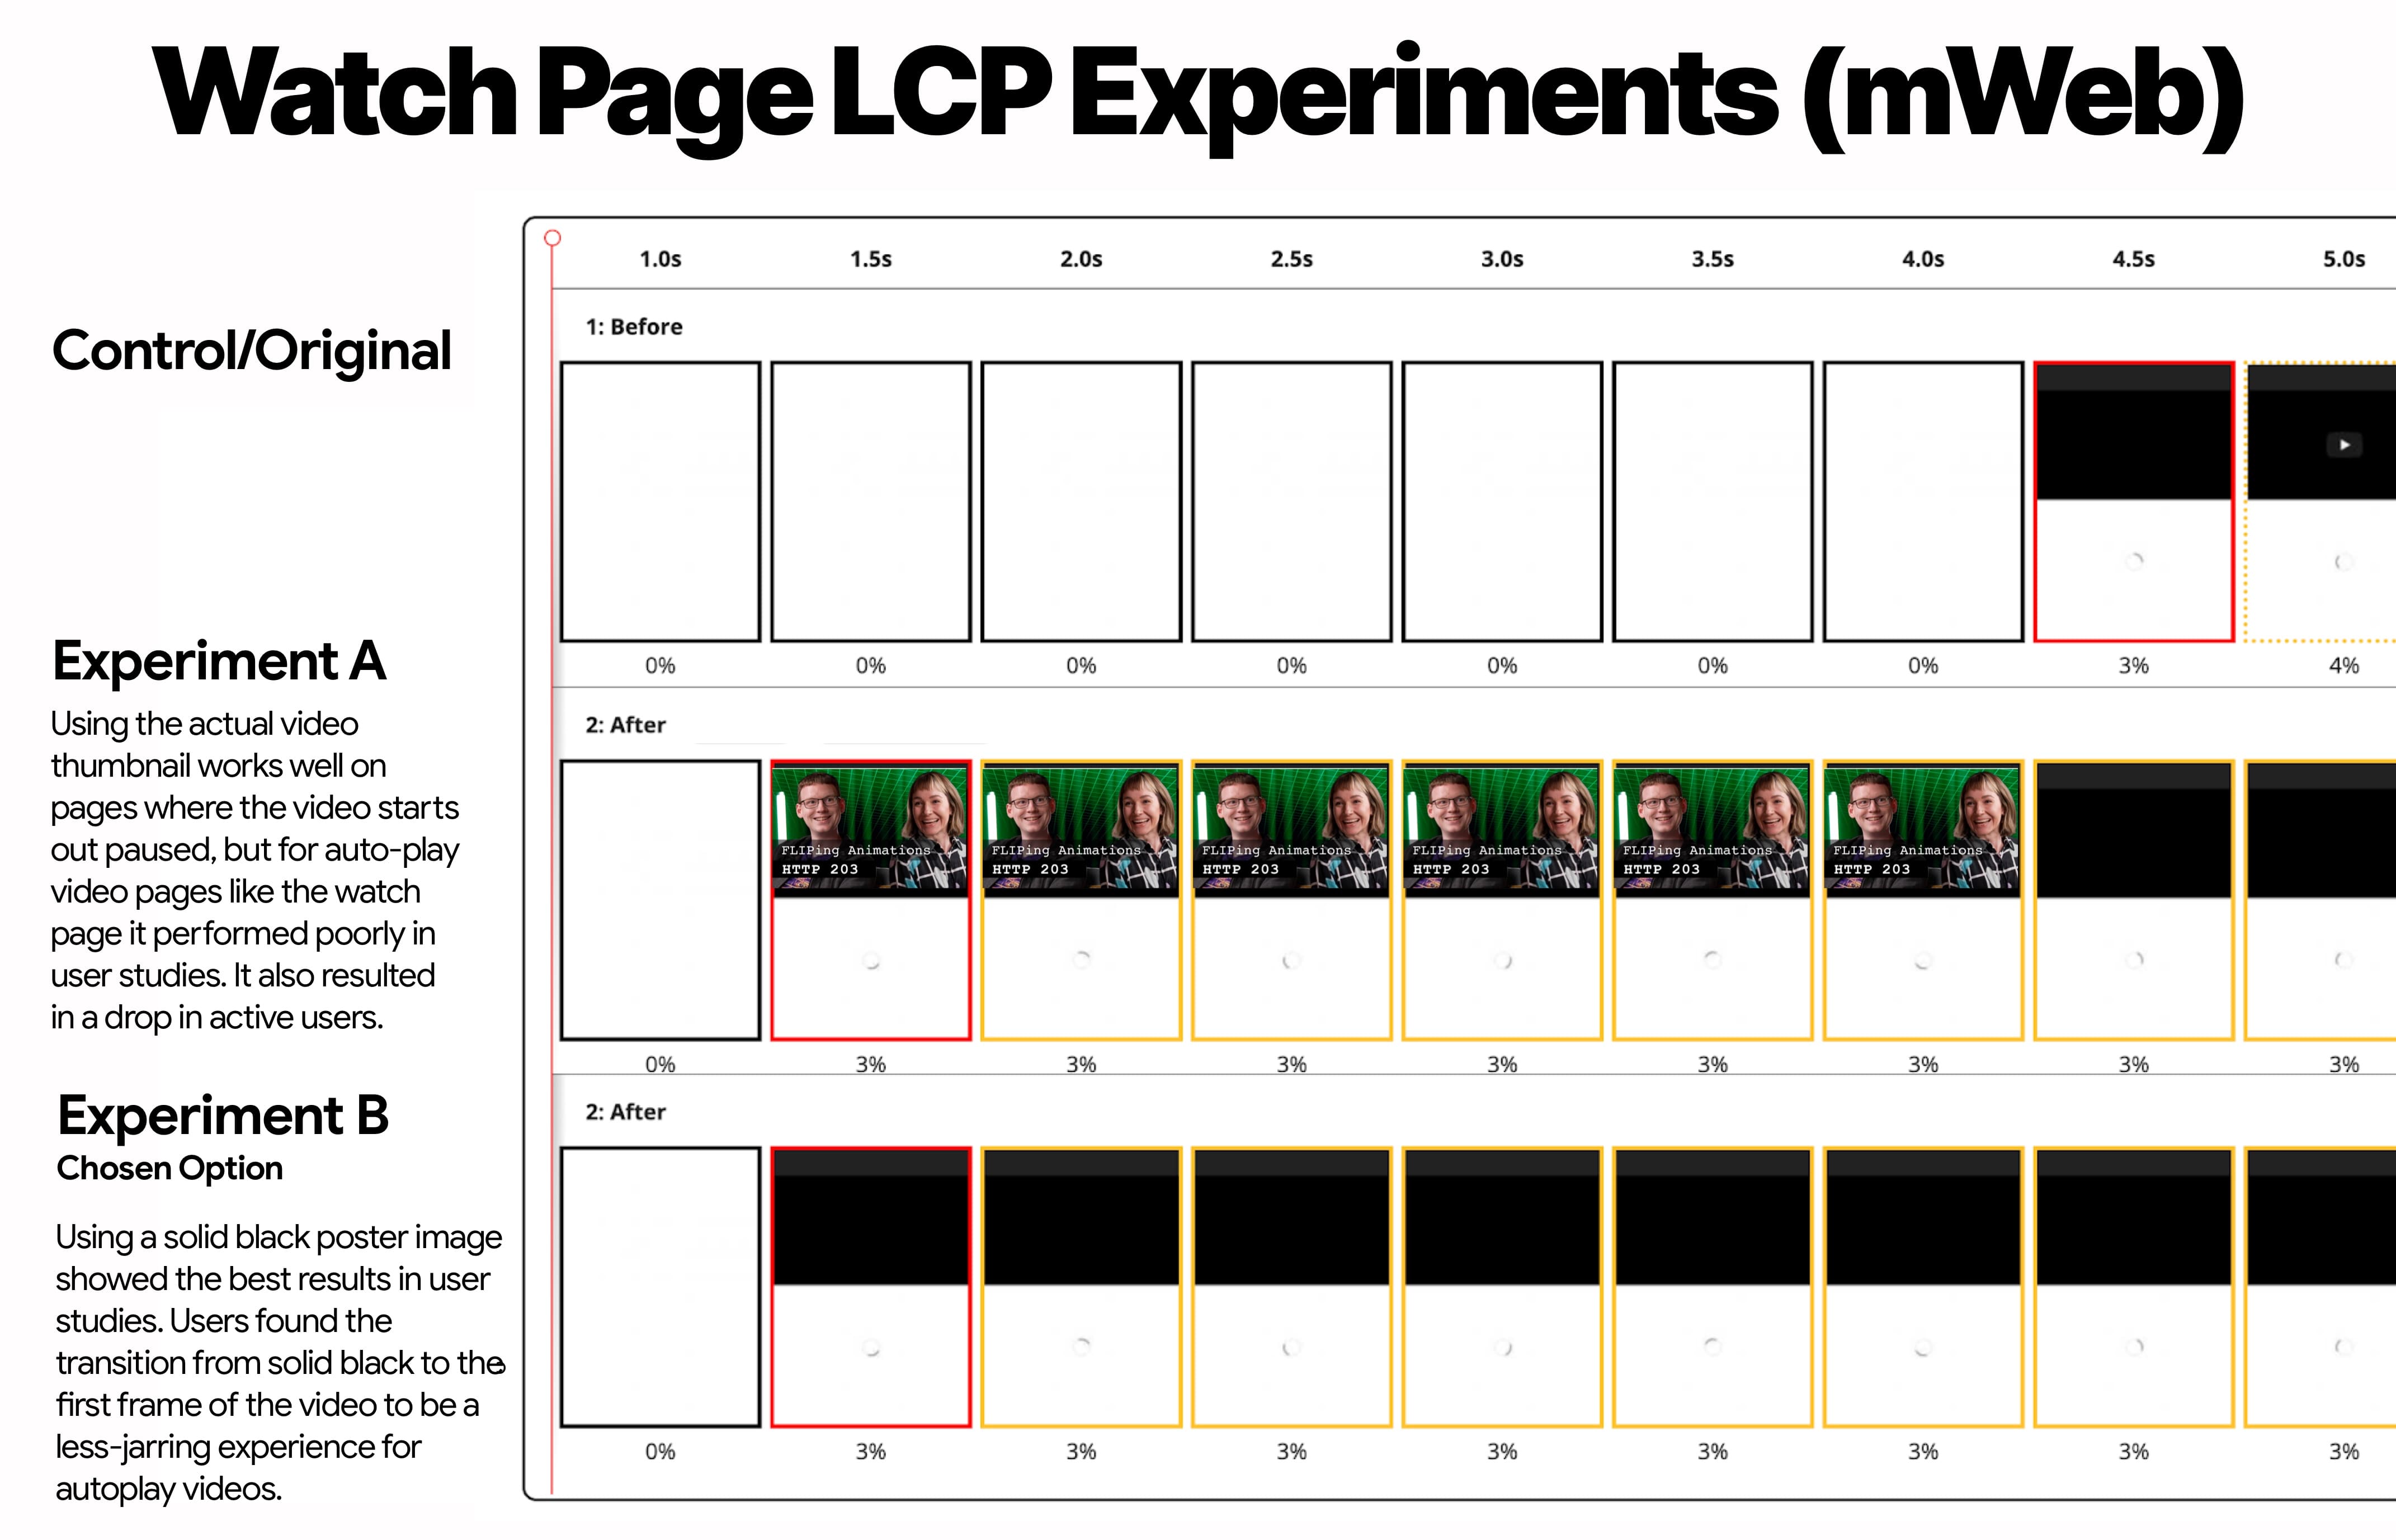 Watch Page LCP Experiment for mobile web showing control, experiment A (image thumbnail) and experiment B (black thumbnail)